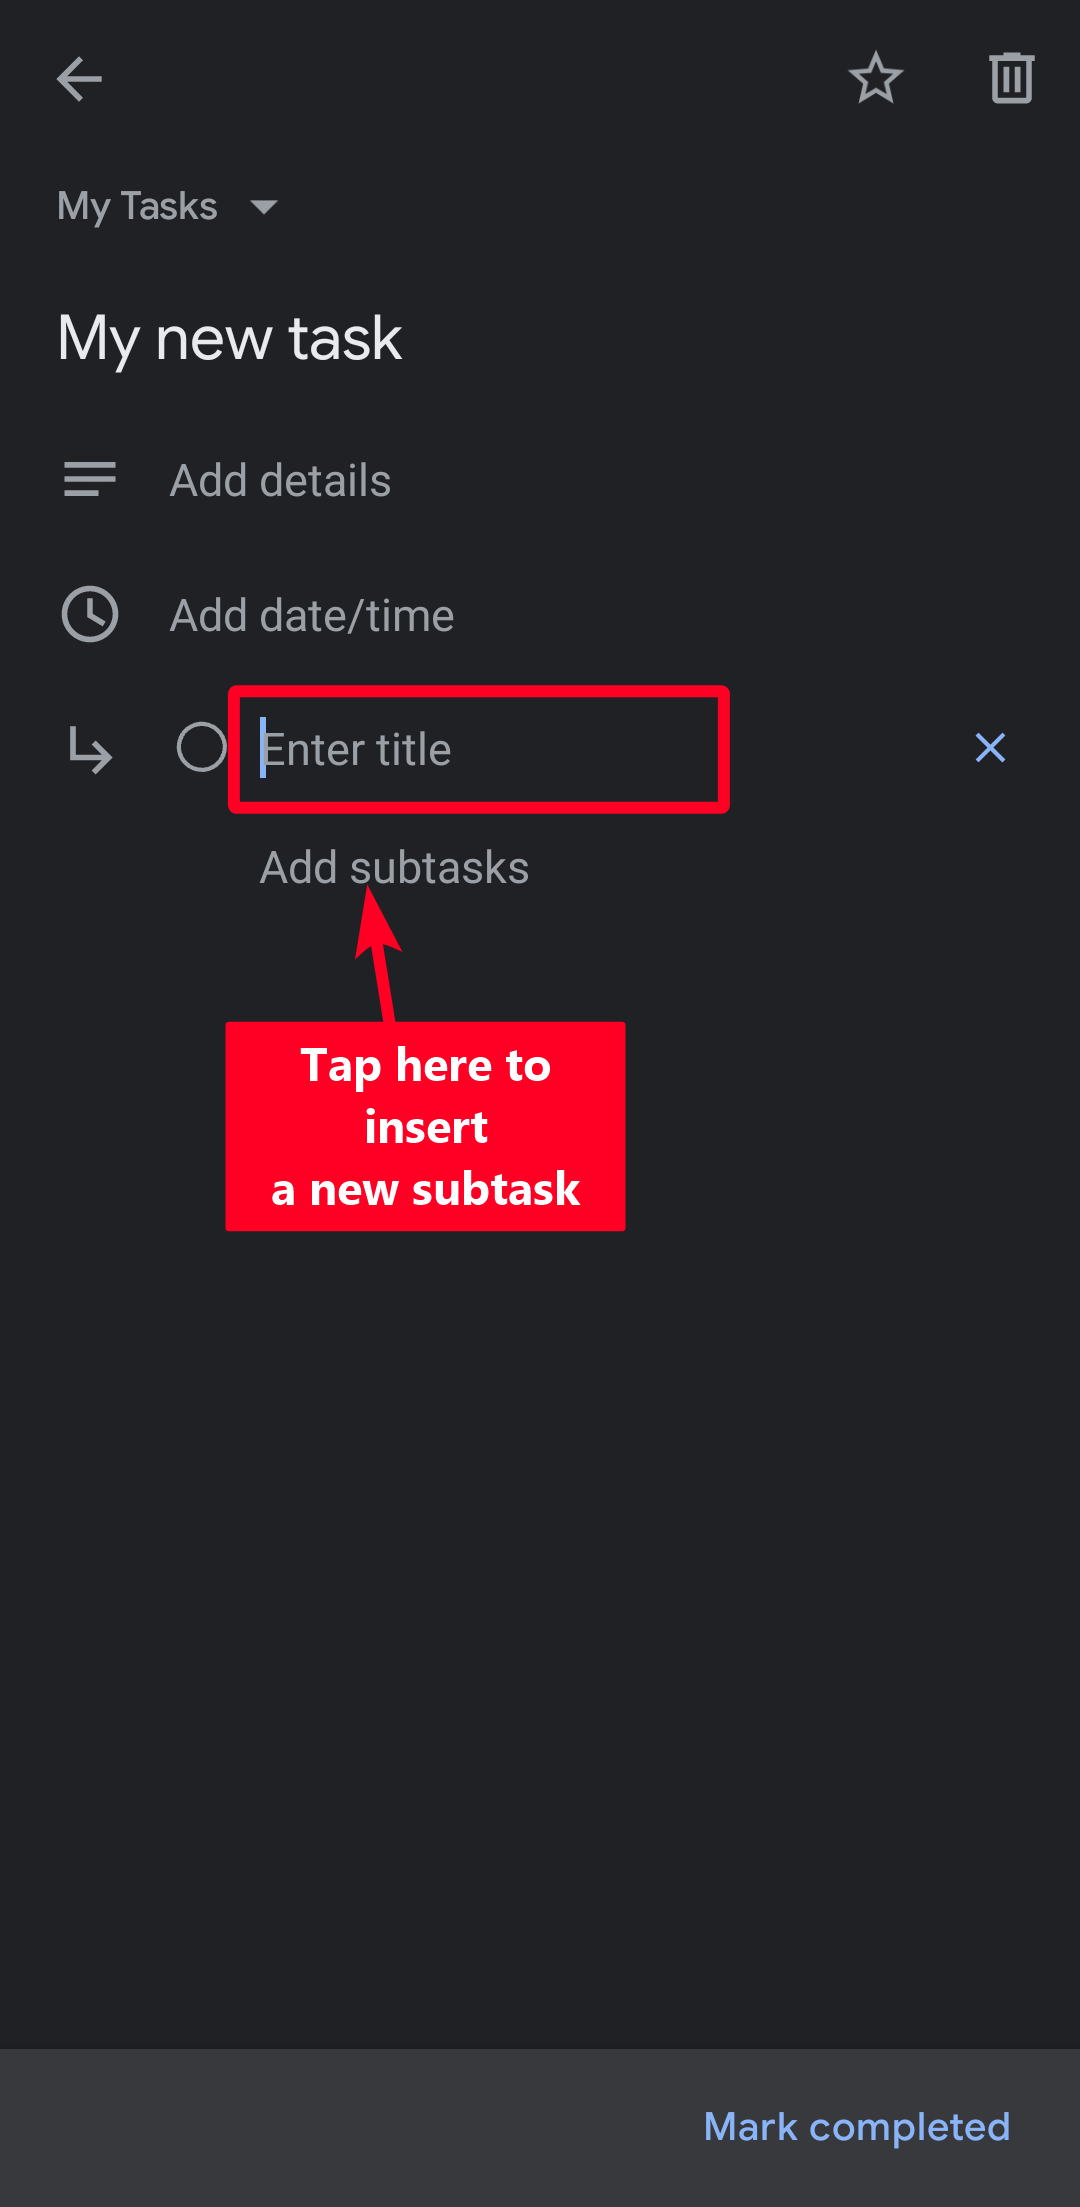 Enter title field for new subtask in Google Tasks Android app